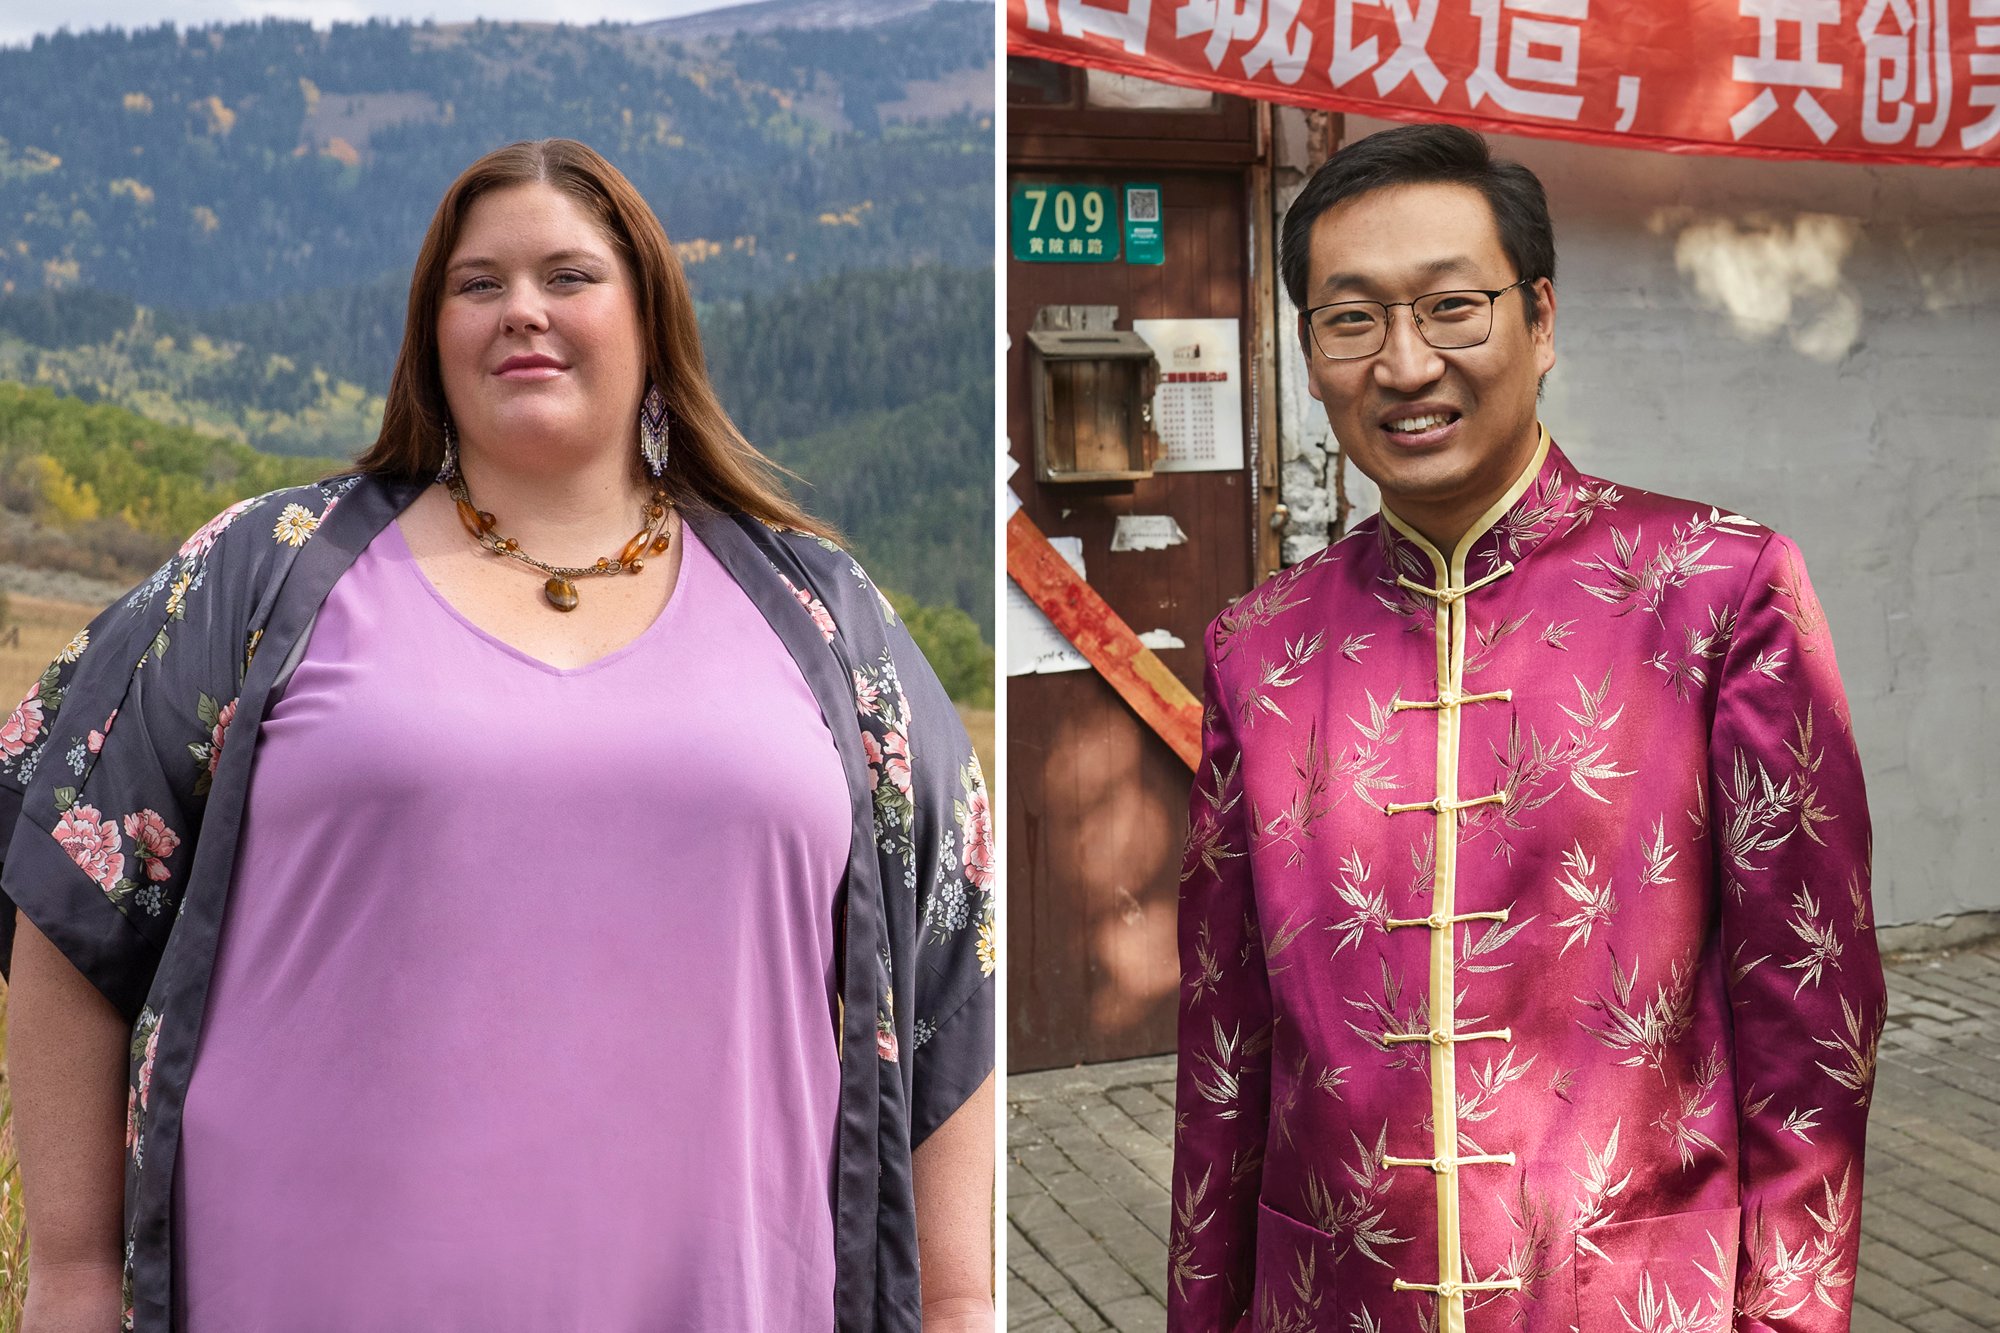 Ella Johnson pictured on the left in Idaho and on the right is Johnny Chao in China for promo photos for '90 Day Fiancé: Before the 90 Days'.